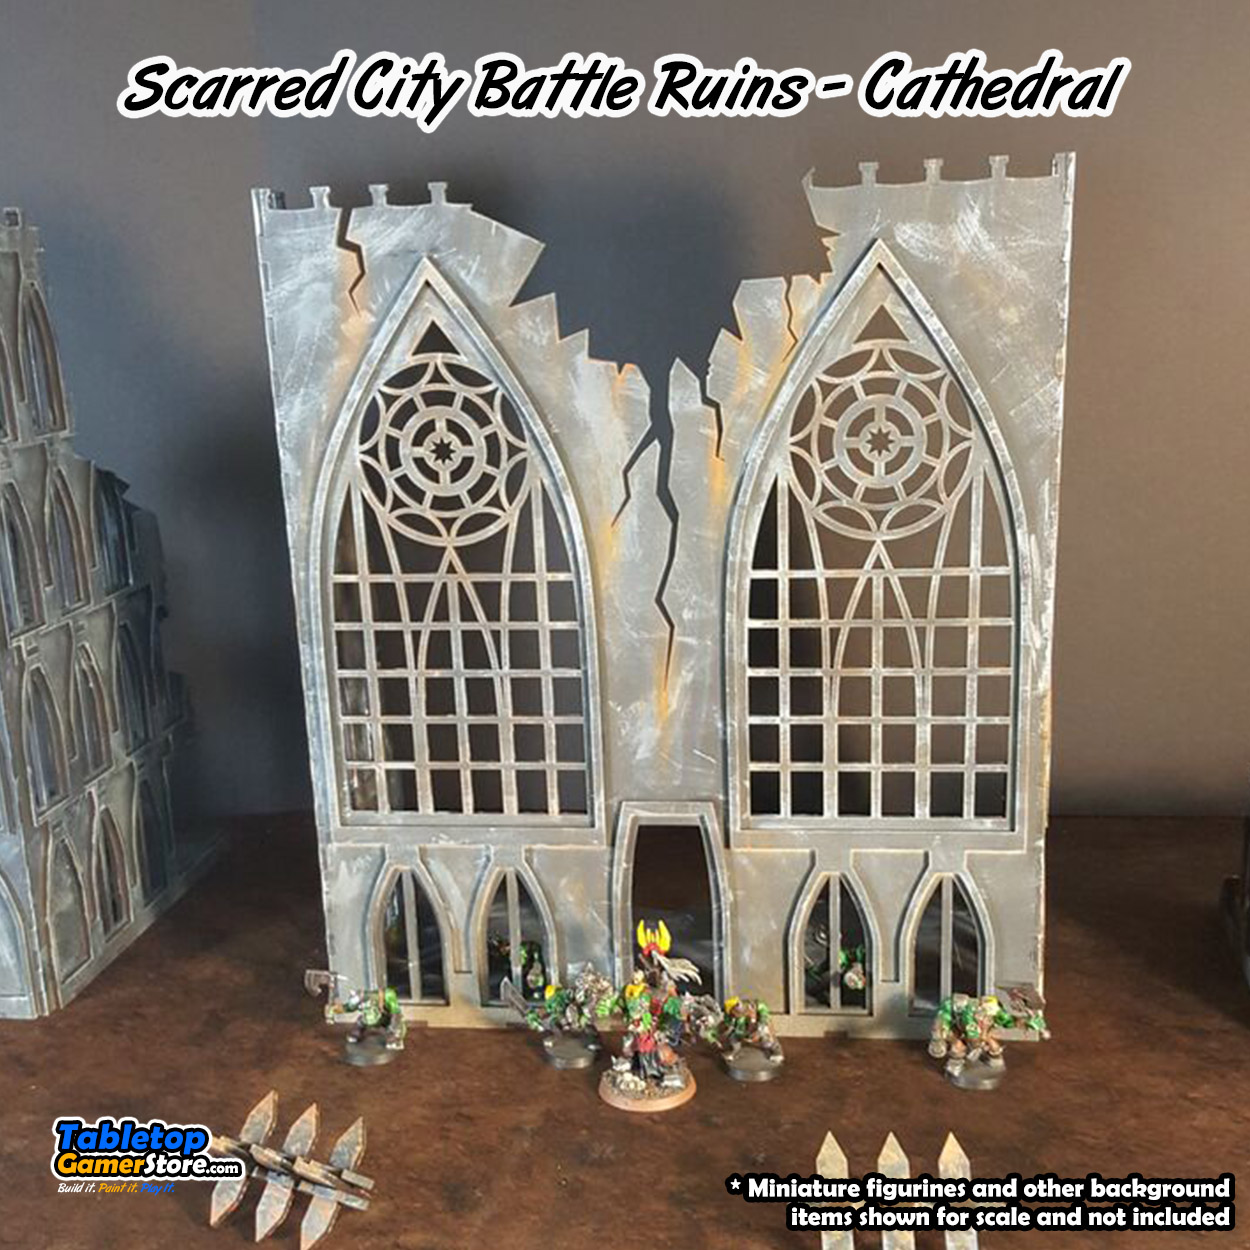 scarred_city_battle_ruins_cathedral_01